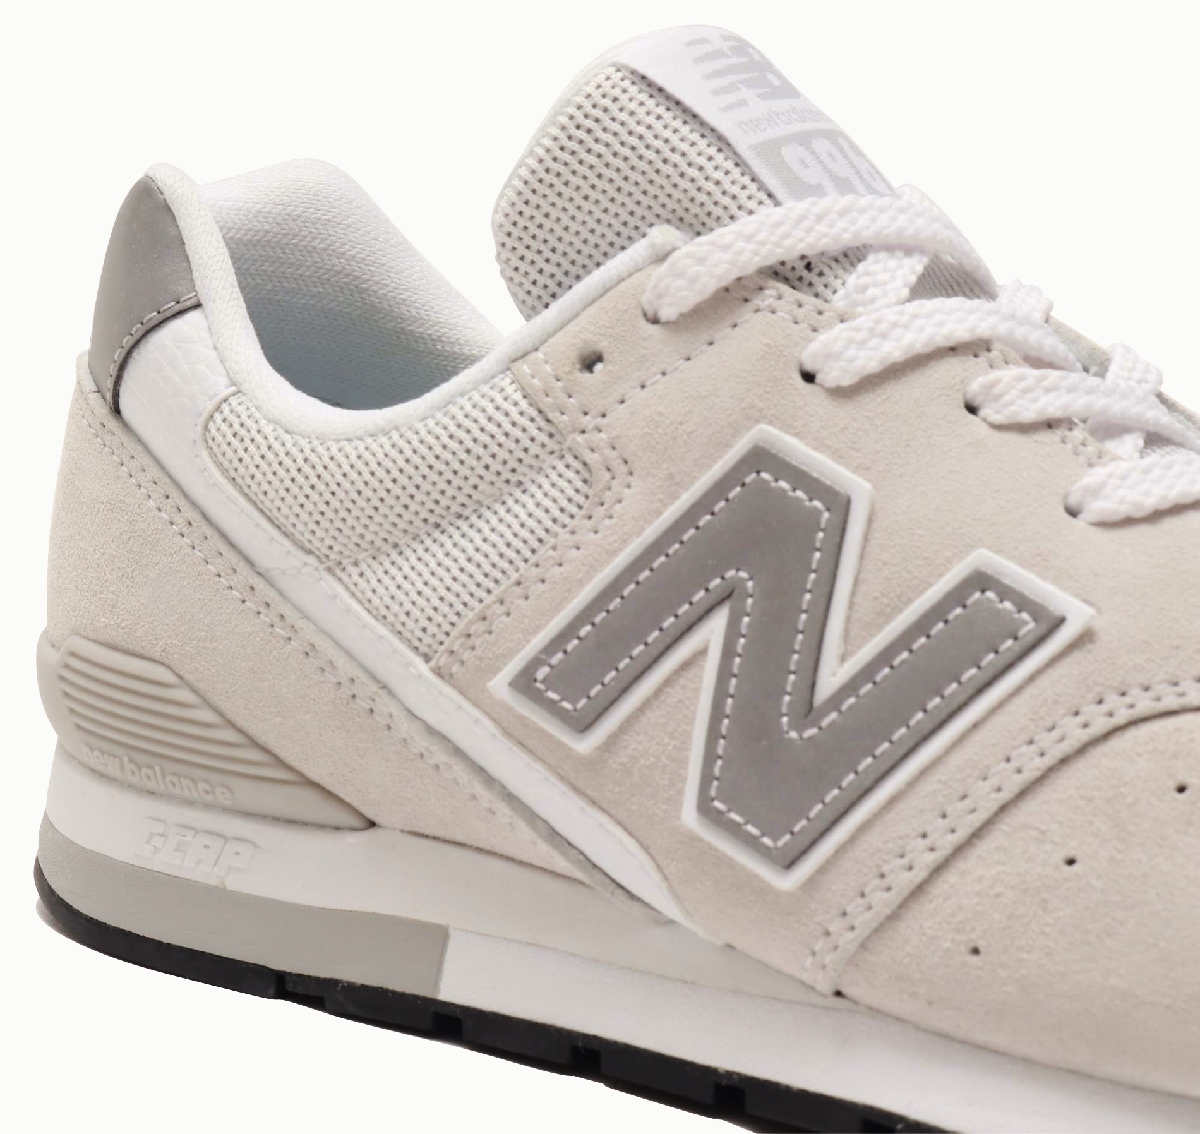 newbalance　　996　　WHITE SUEDE LEATHER_d0152280_17595149.jpg